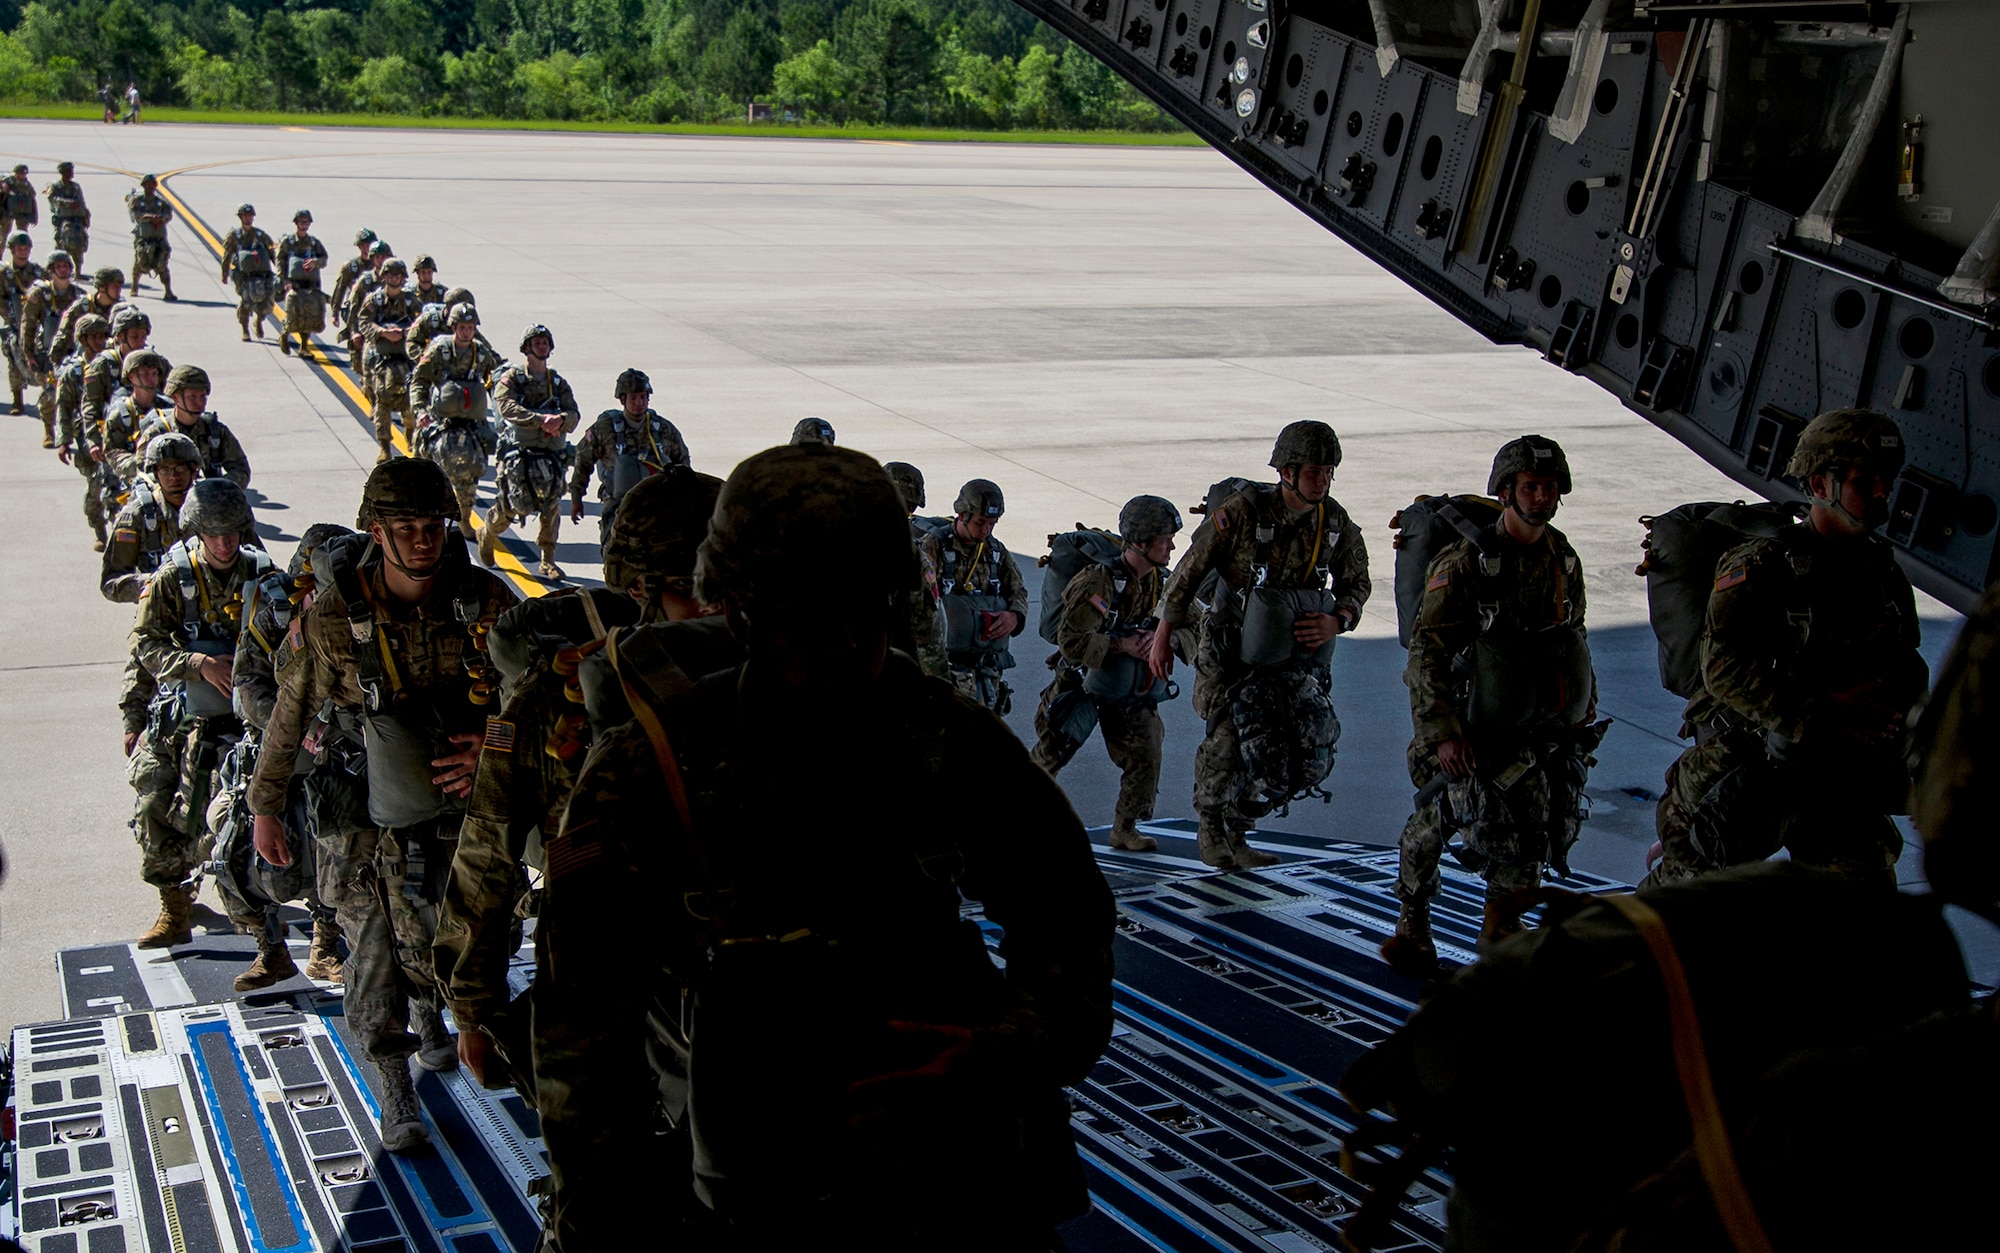 About 1,600 paratroopers from the 82nd Airborne Division packed 18 C-17 Globemaster IIIs from Joint Base Charleston, S.C. en-route to a Fort Bragg, N.C. airdrop May 25. (U.S. Air Force Photo / Tech. Sgt. Bobby Pilch)